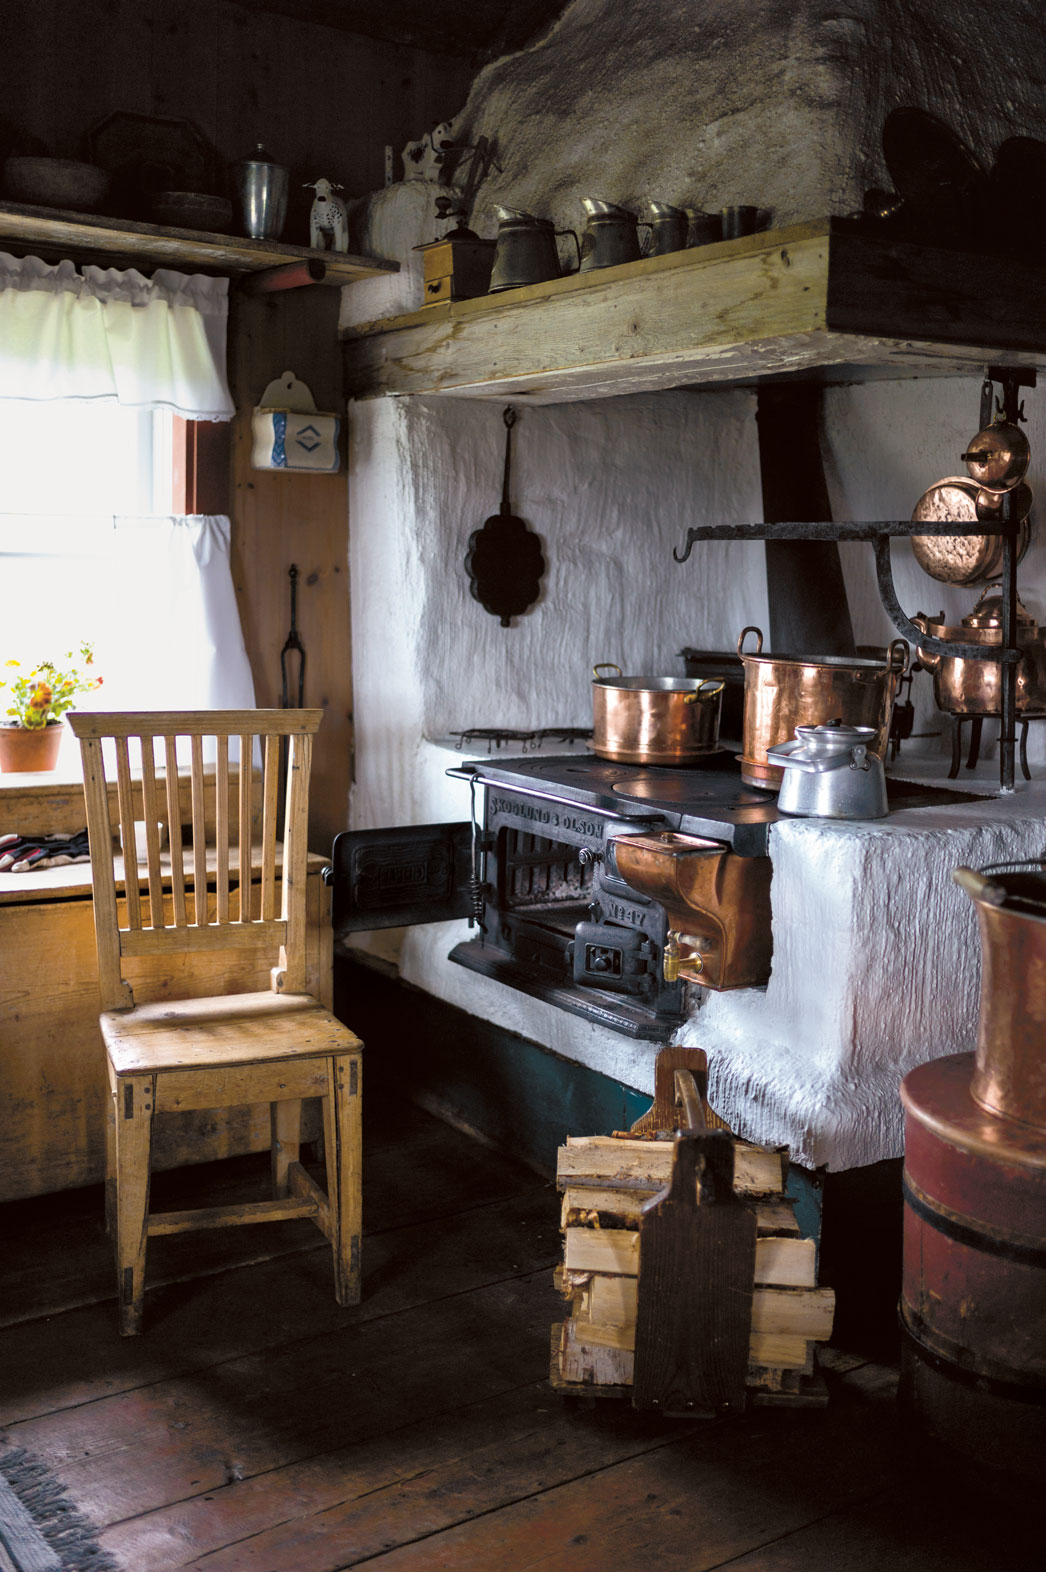 Kitchen interior from The Nordic Baking Book